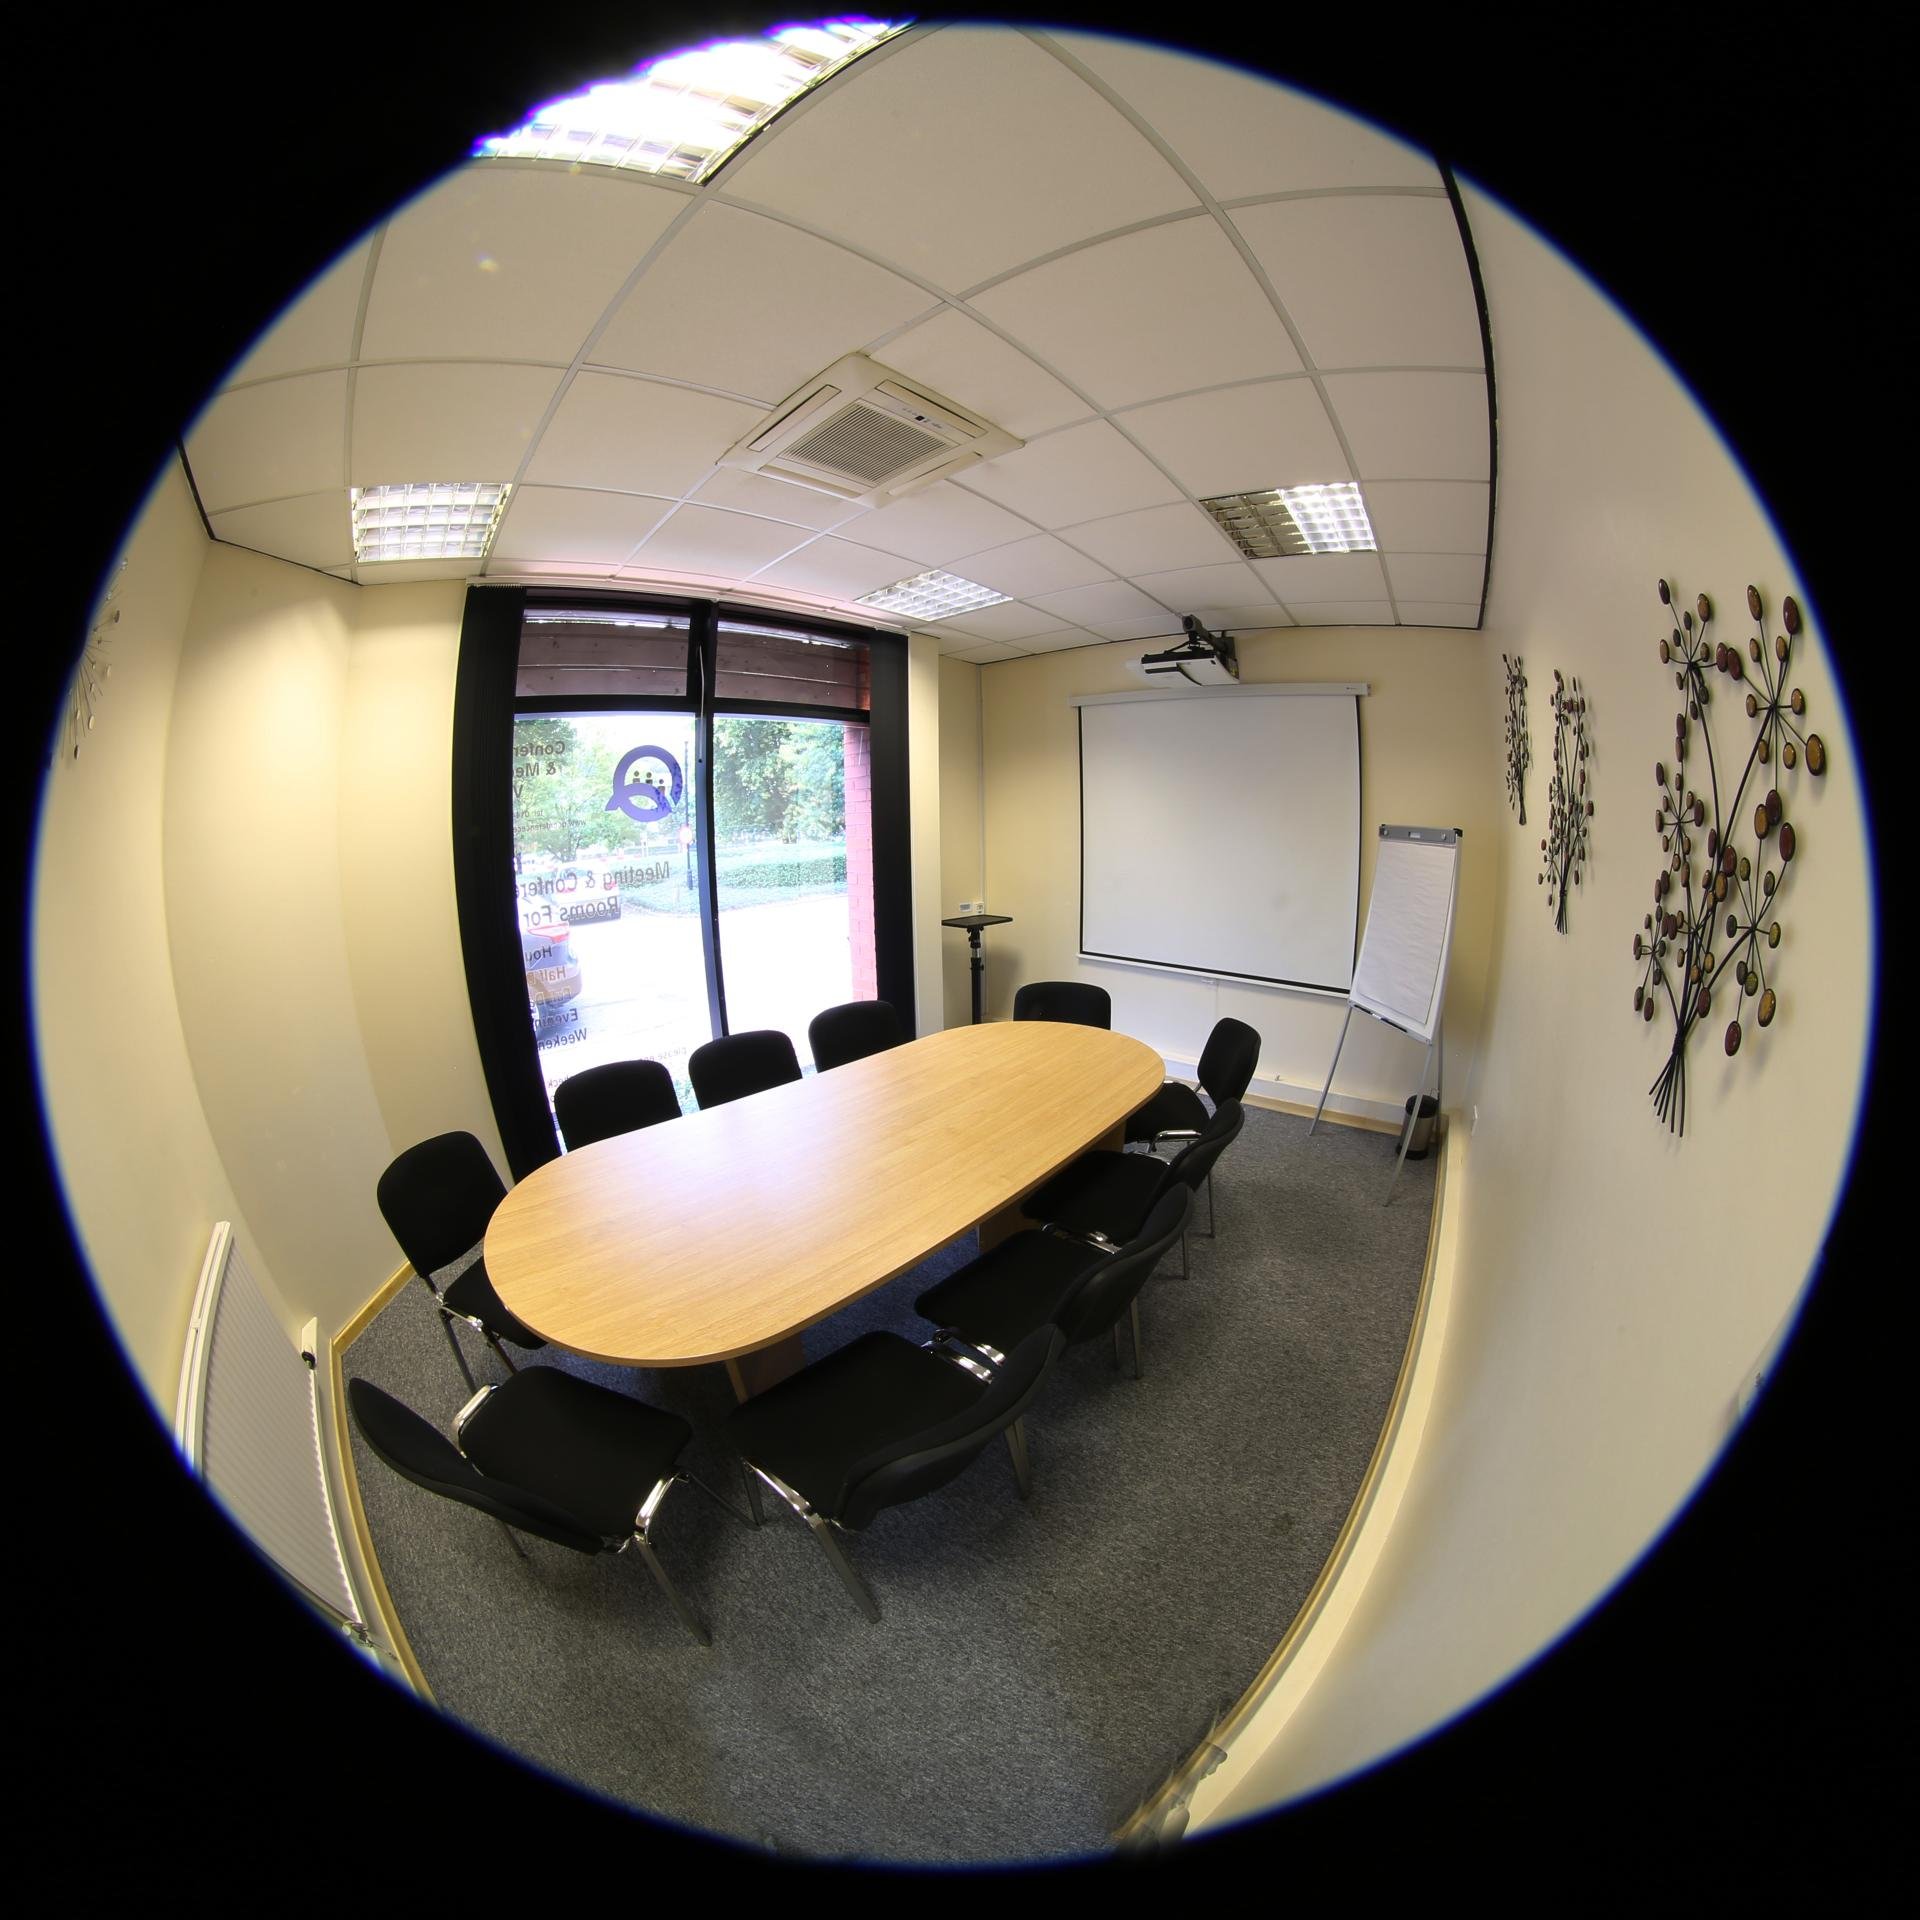 Centre available for training and meetings in a professional, comfortable environment. Rooms hold from 6 - 30 delegates. Days, evenings and weekends available